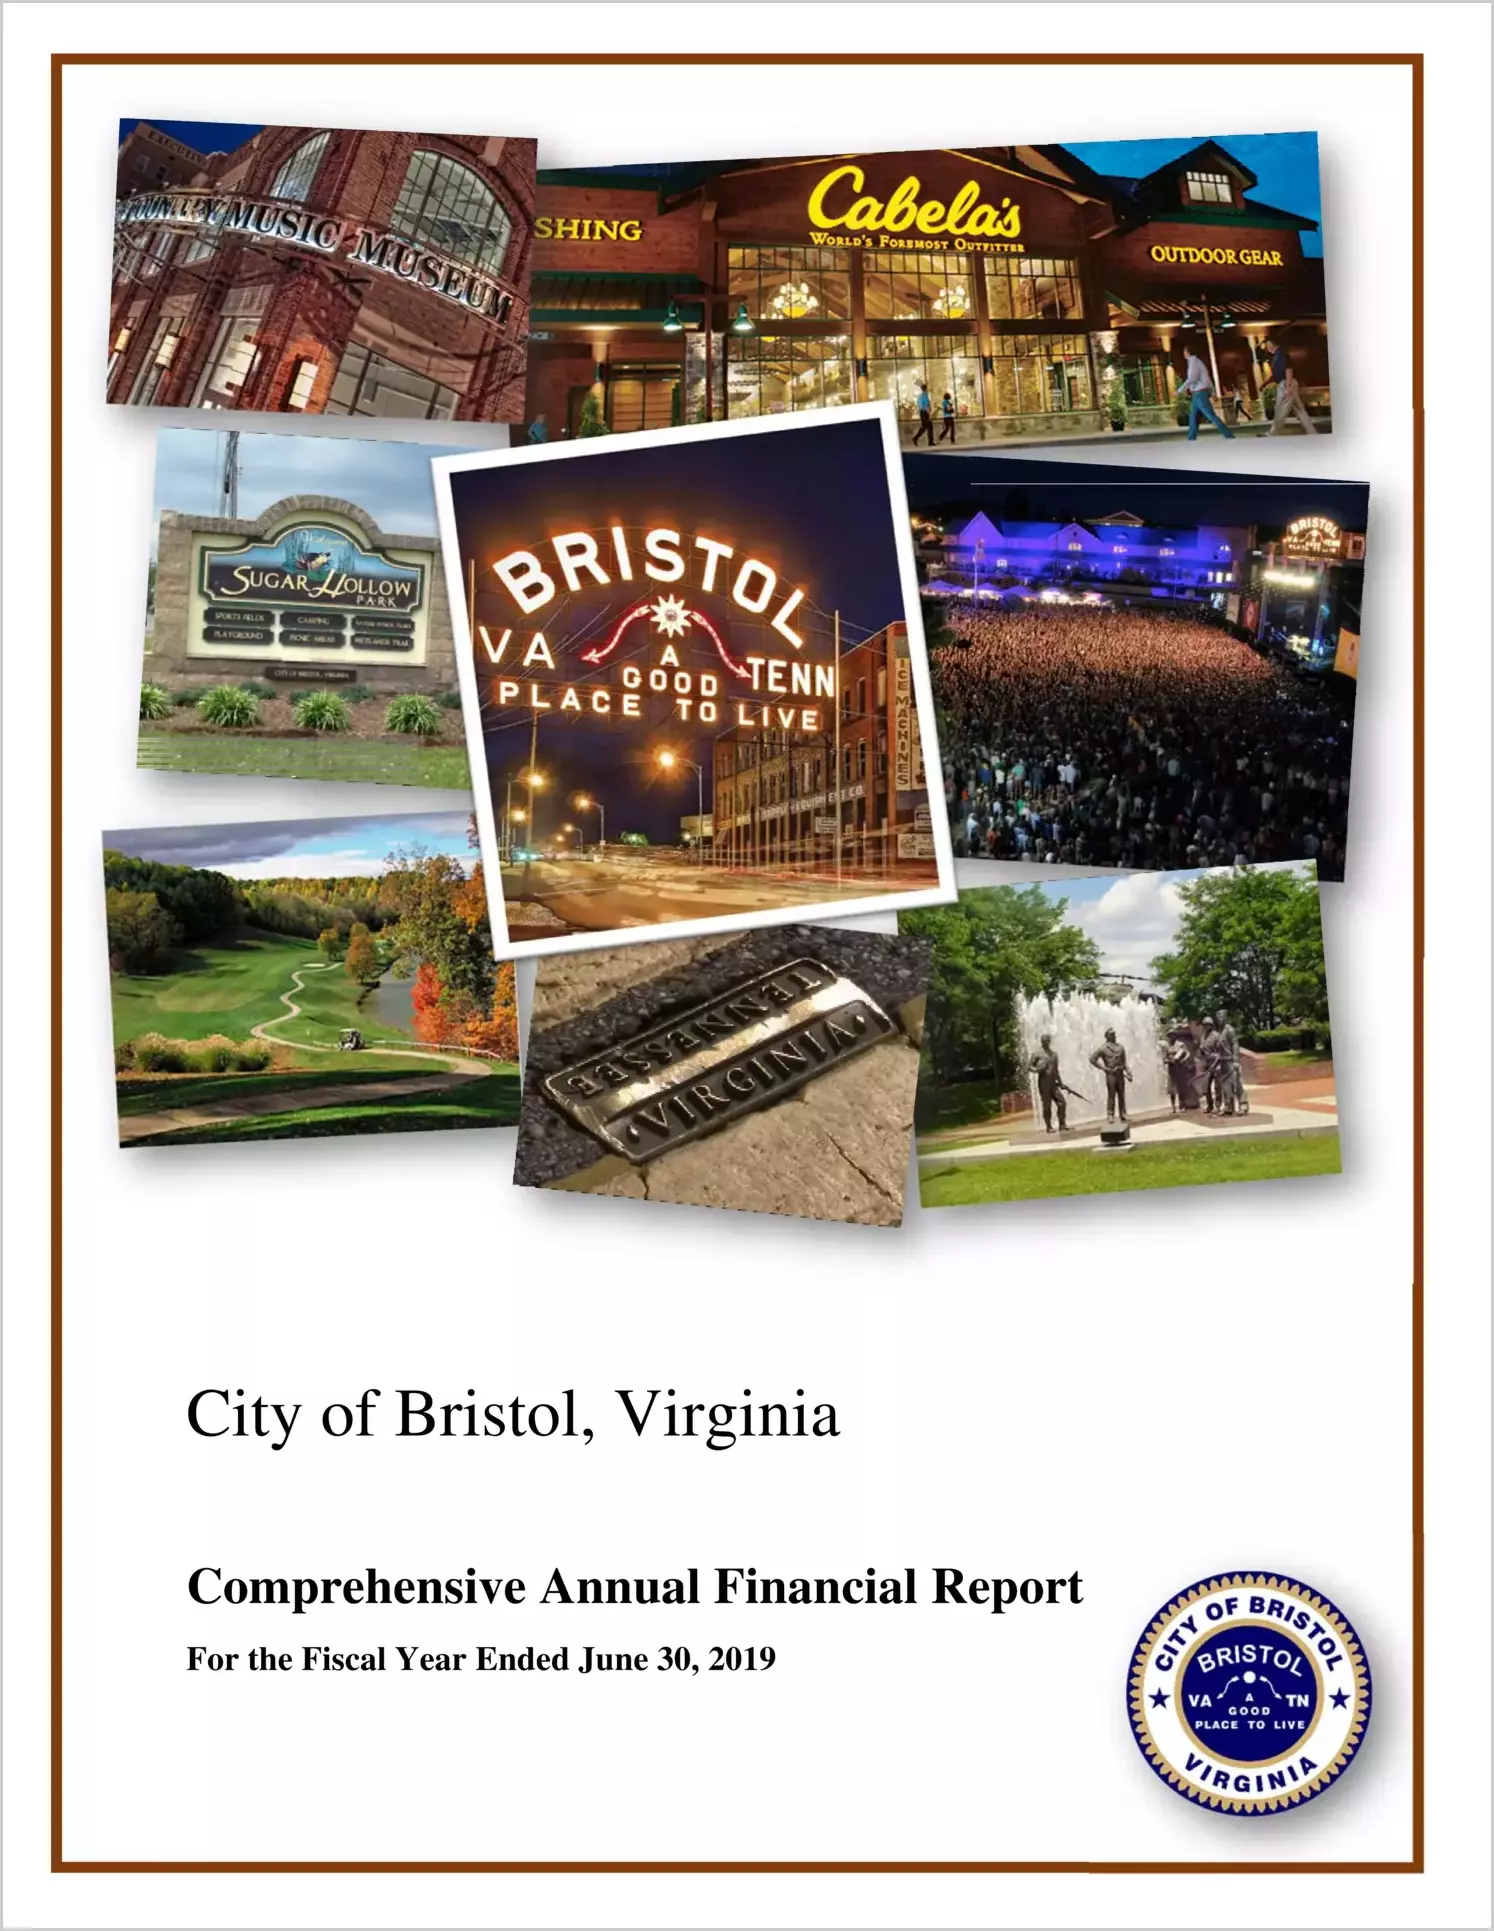 2019 Annual Financial Report for City of Bristol